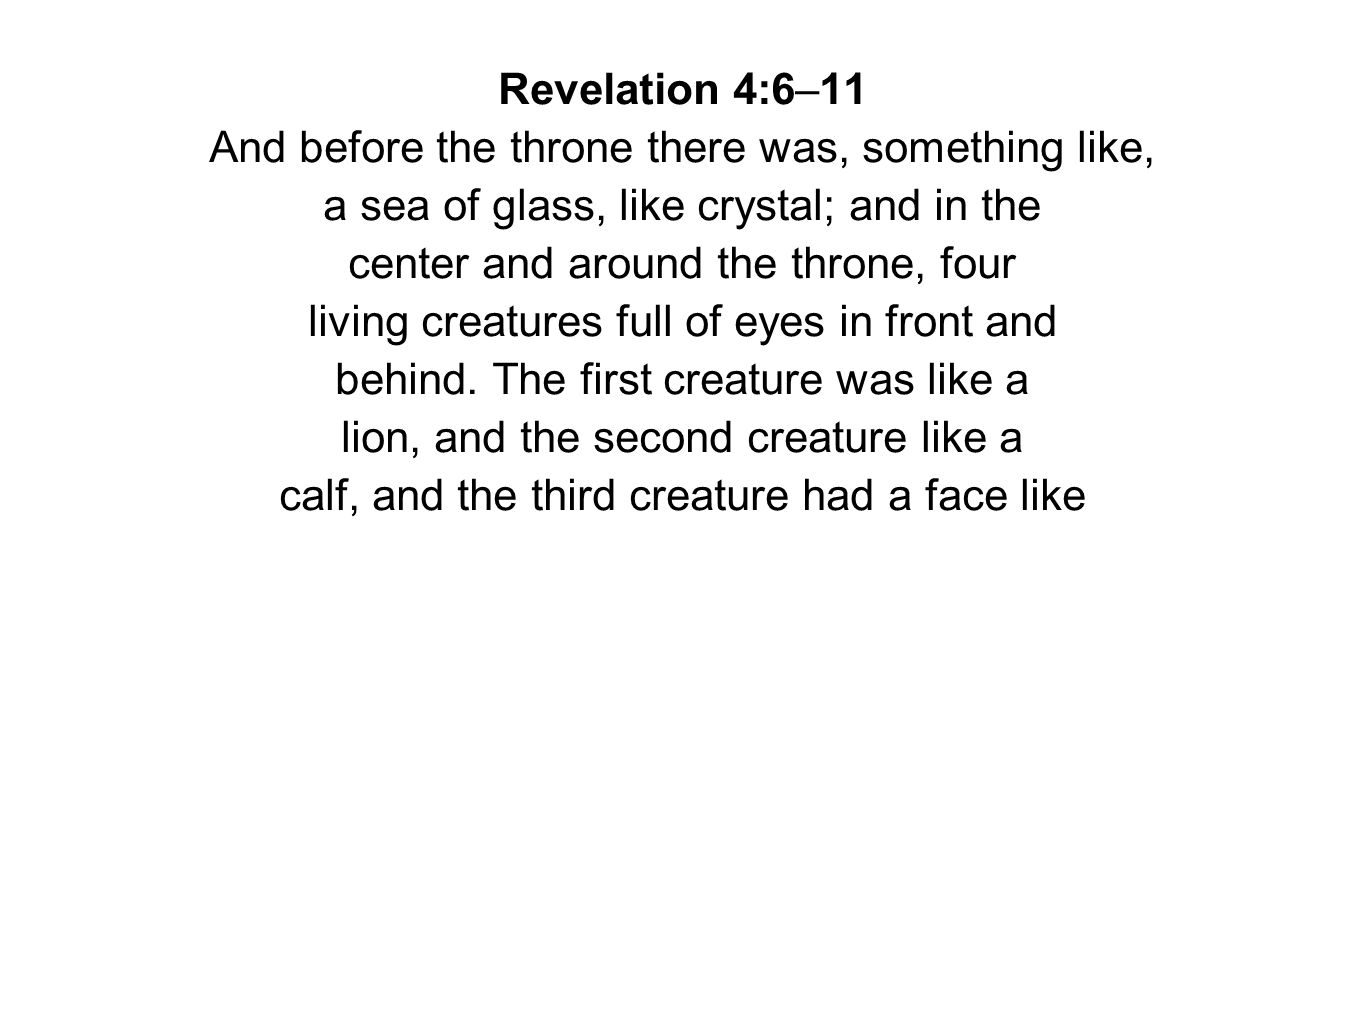 Revelation 4:6–11 And before the throne there was, something like, a sea of glass, like crystal; and in the center and around the throne, four living creatures full of eyes in front and behind.